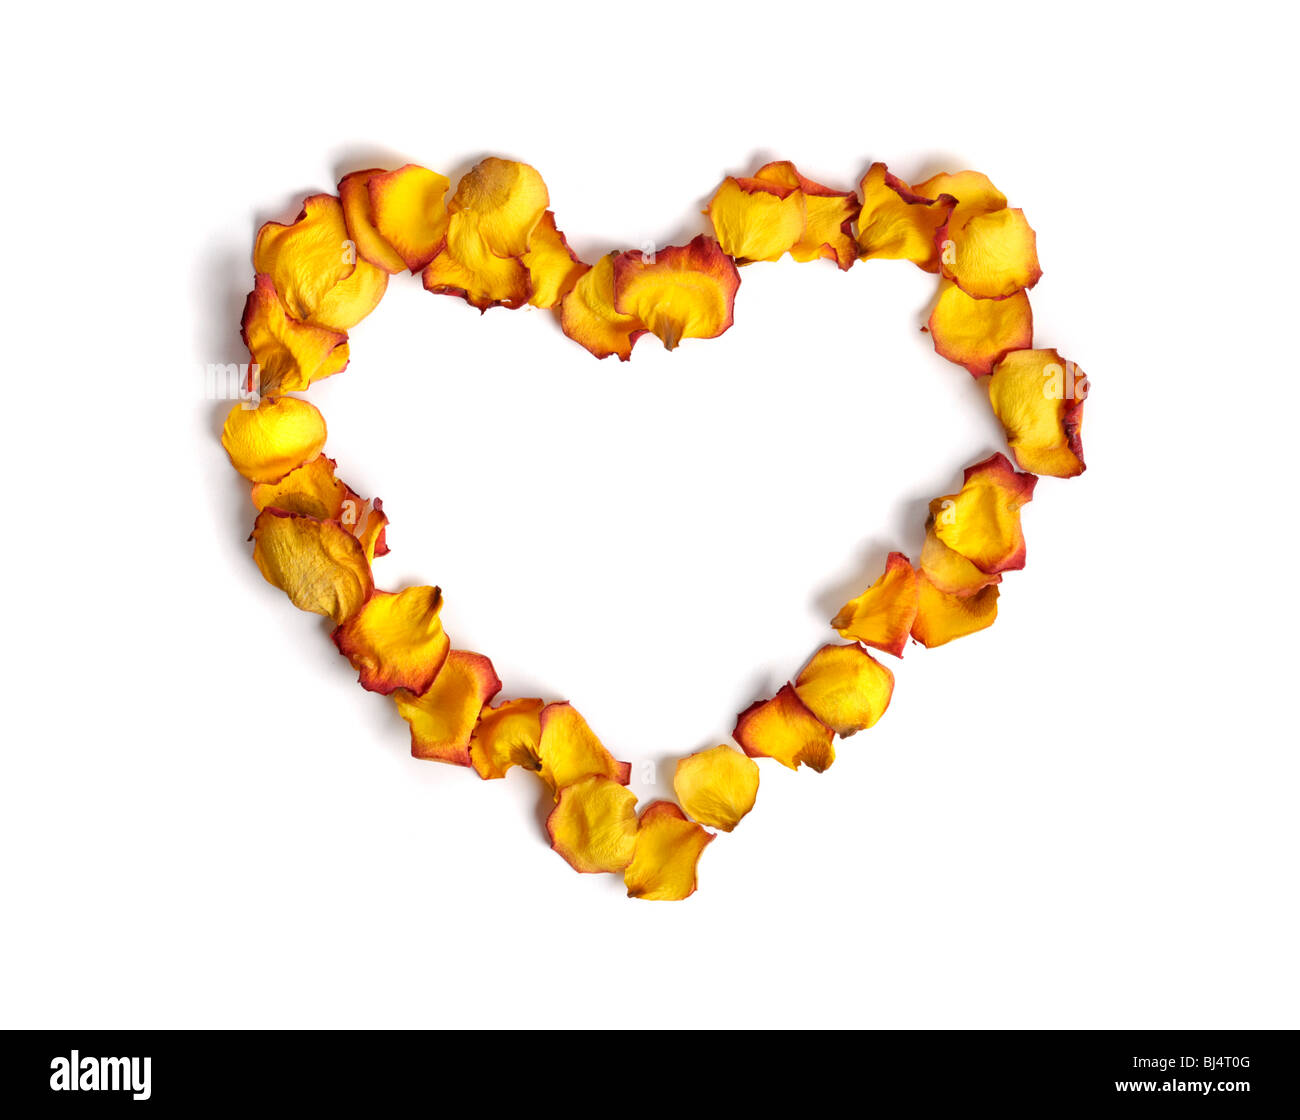 Heart shape made from withered yellow rose petals isolated on white background Conceptual pattern Stock Photo